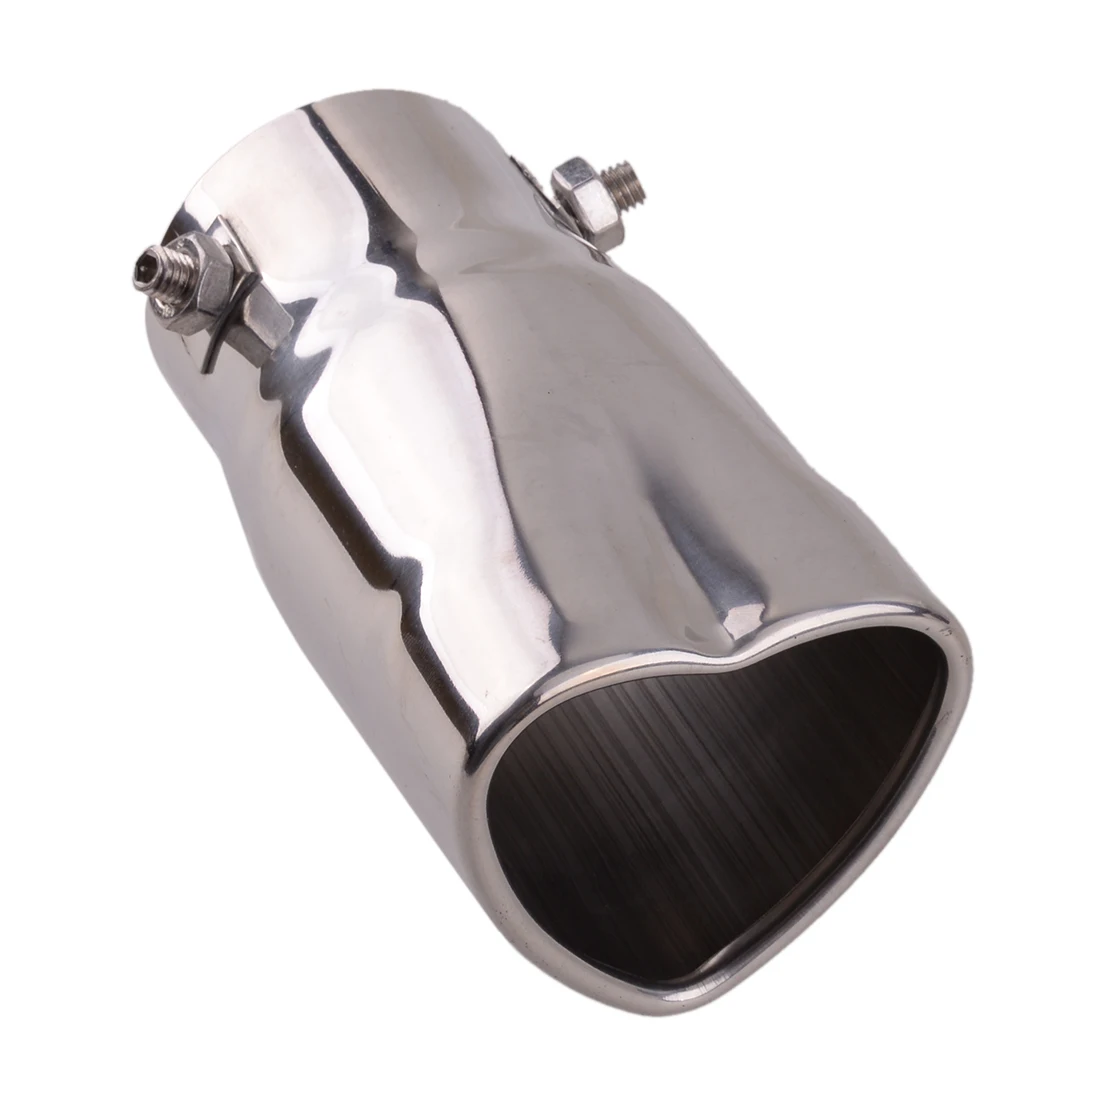 67 x 60mm Heart Shaped Exhaust Muffler Tip Stainless Steel Outlet for Car 